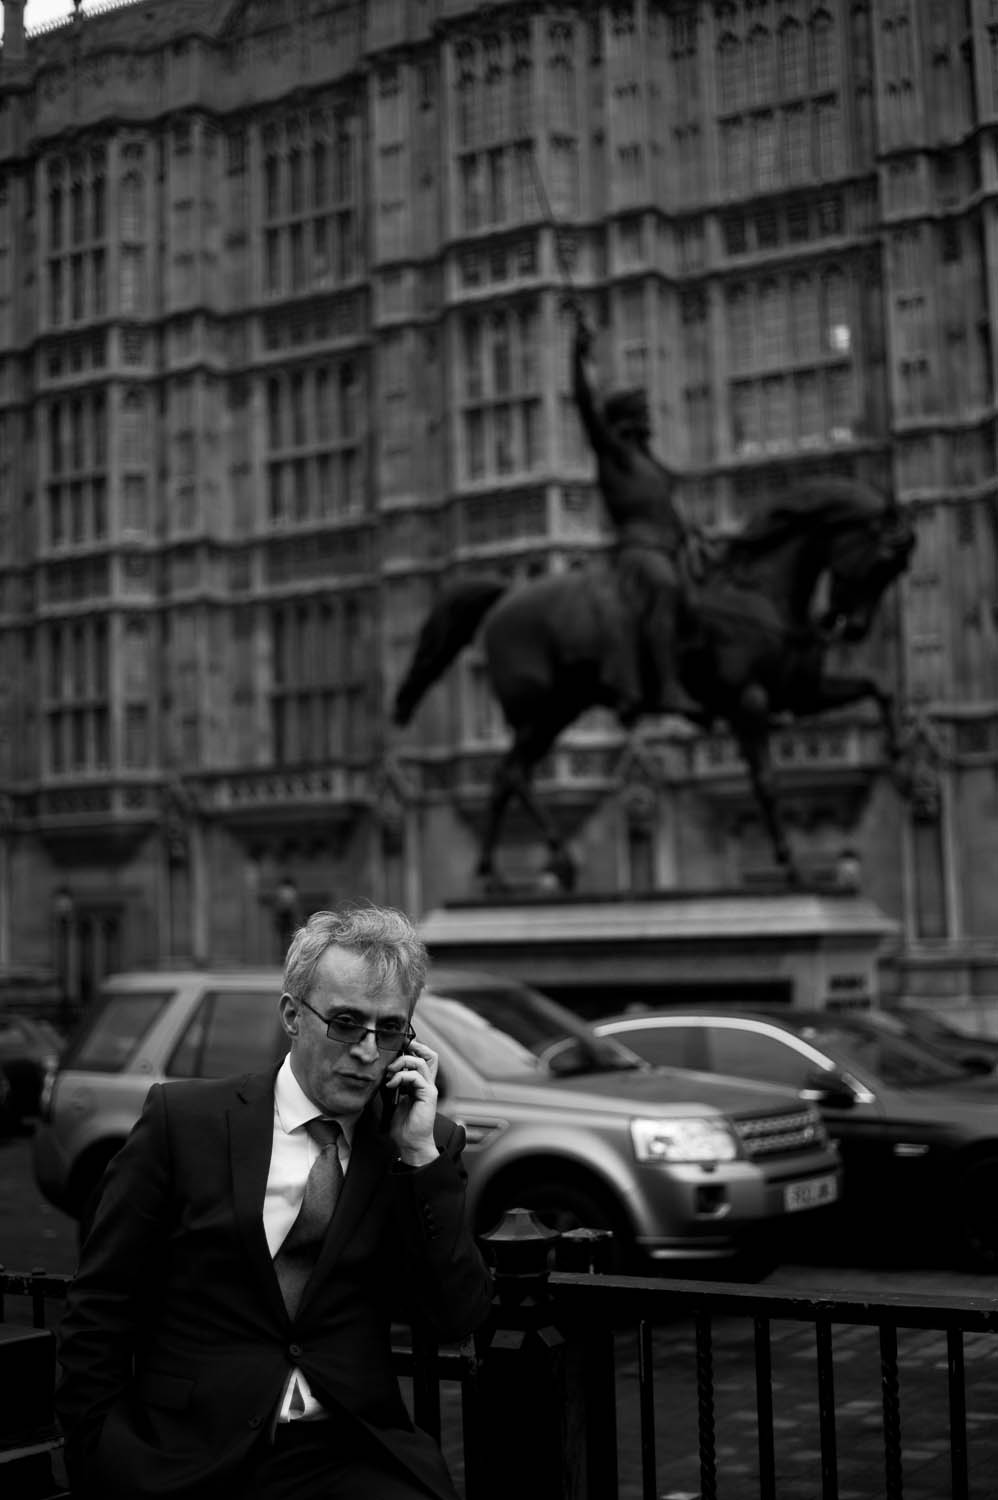 A man in a suit speaking on the phone in front of a horse statue in London